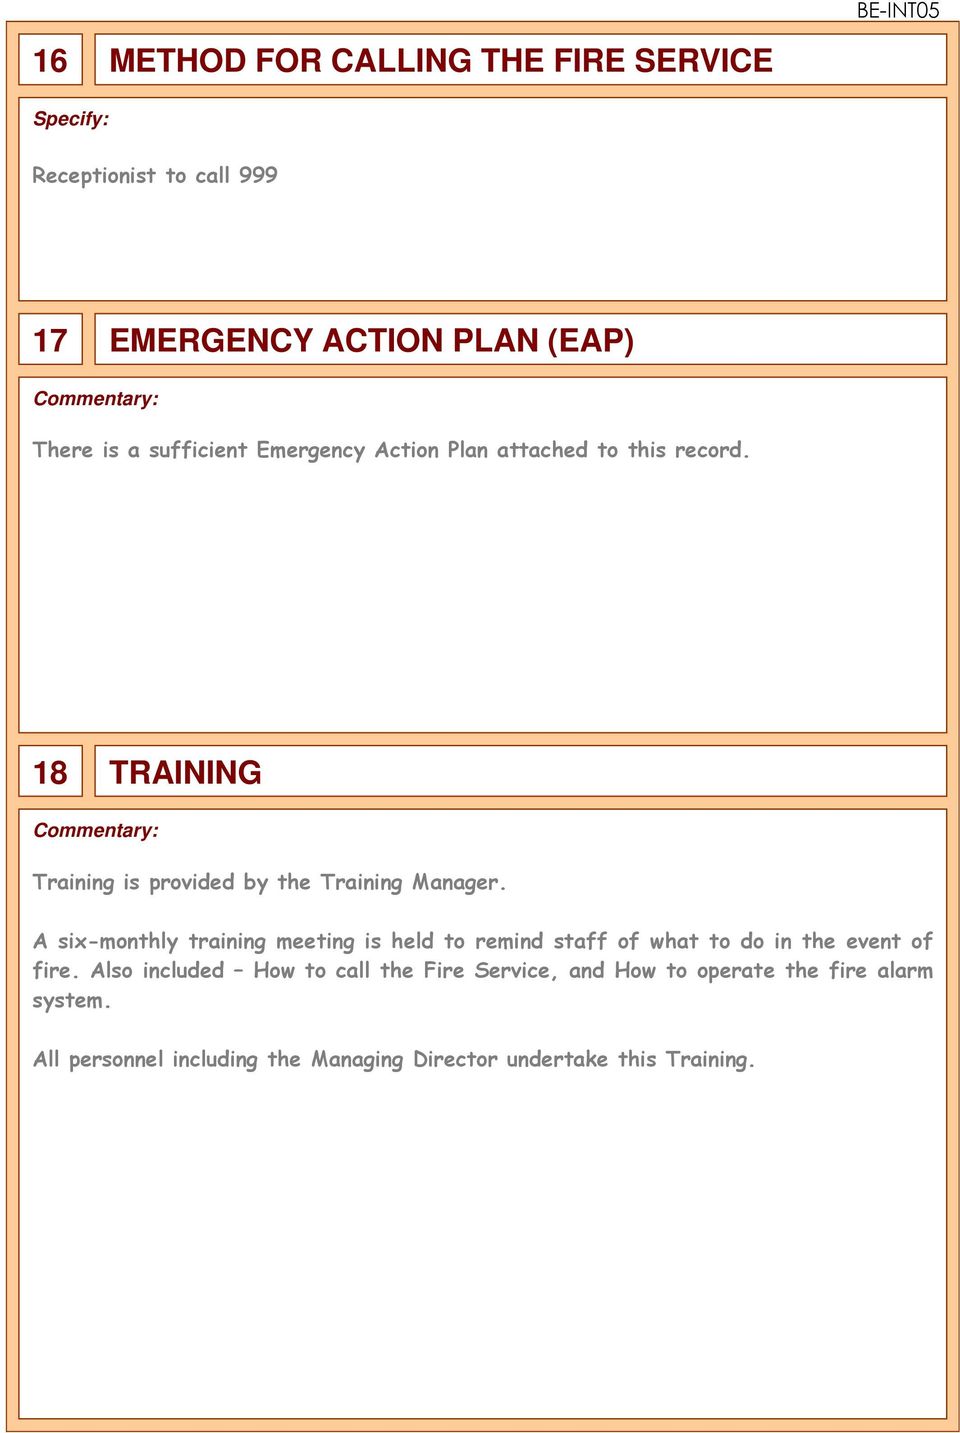 18 TRAINING Commentary: Training is provided by the Training Manager.